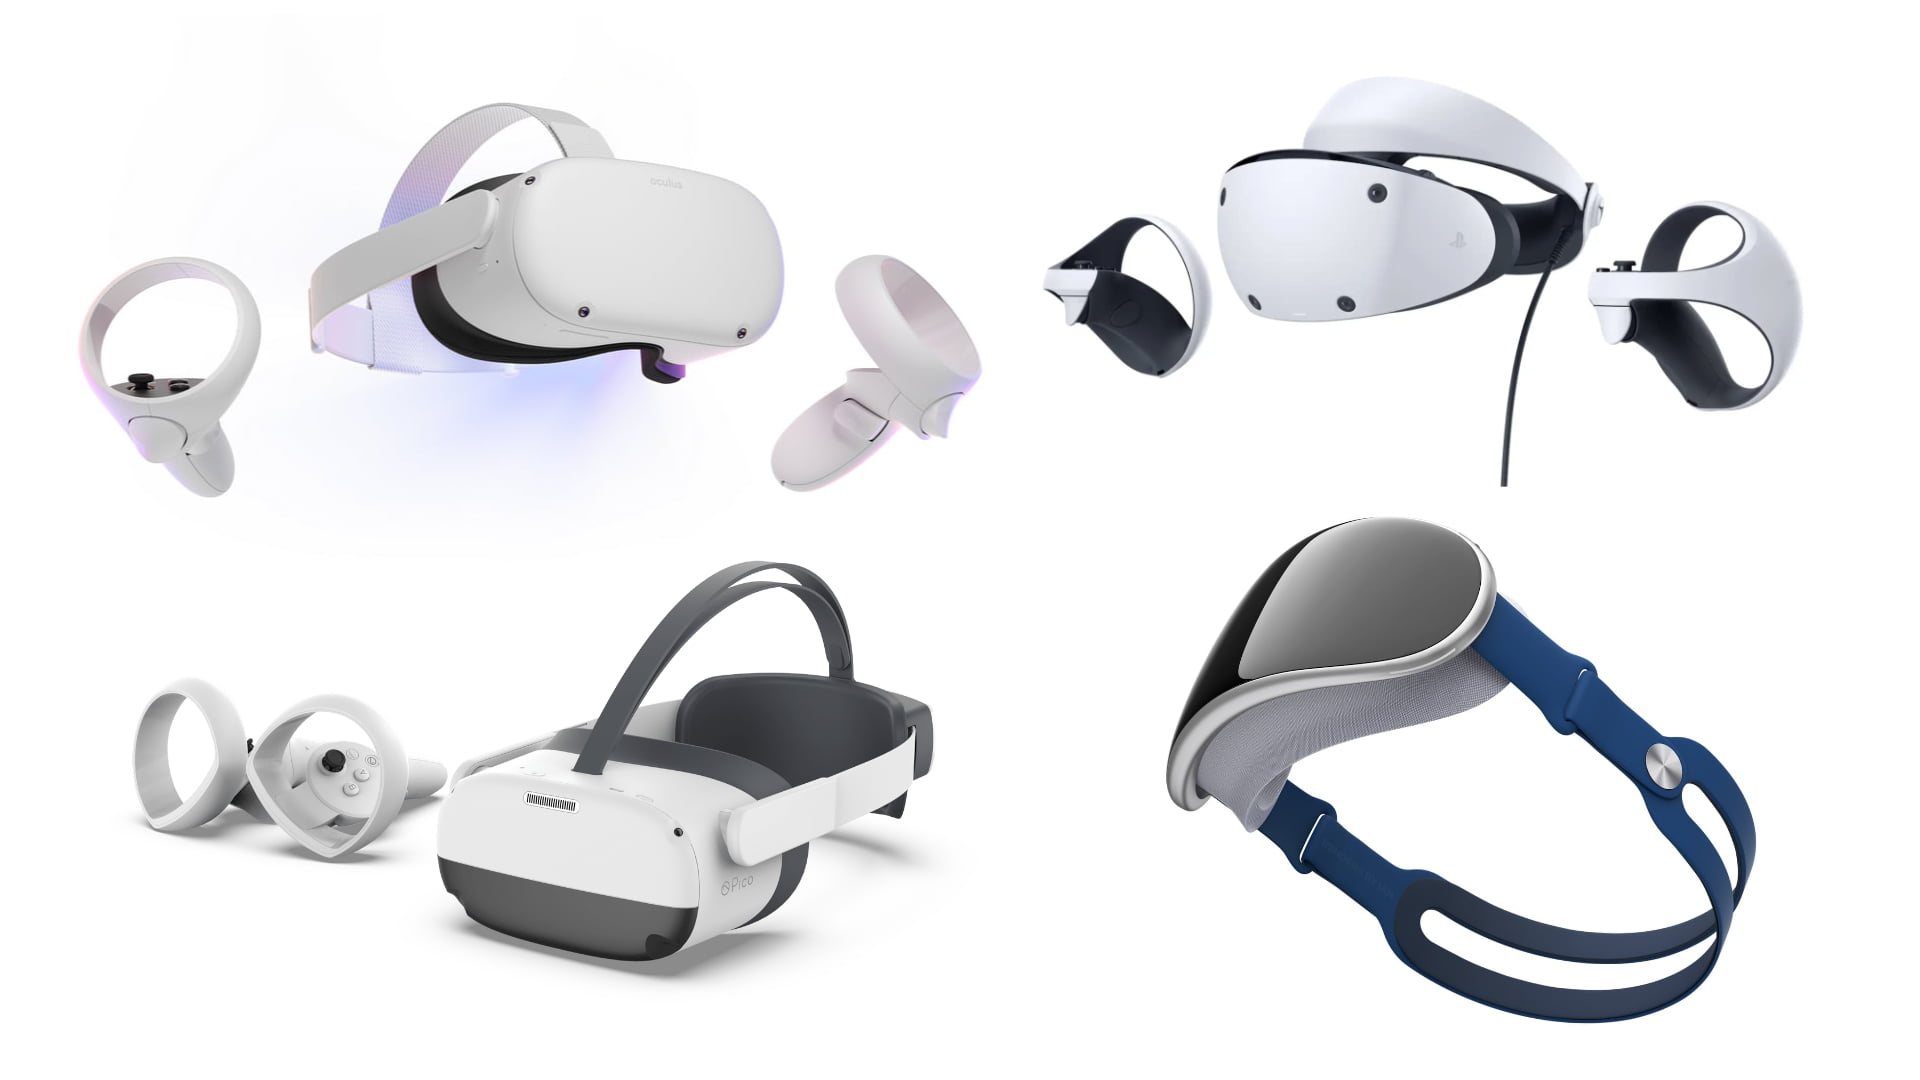 Meta's VR strategy unsustainable, Apple in spotlight - market research